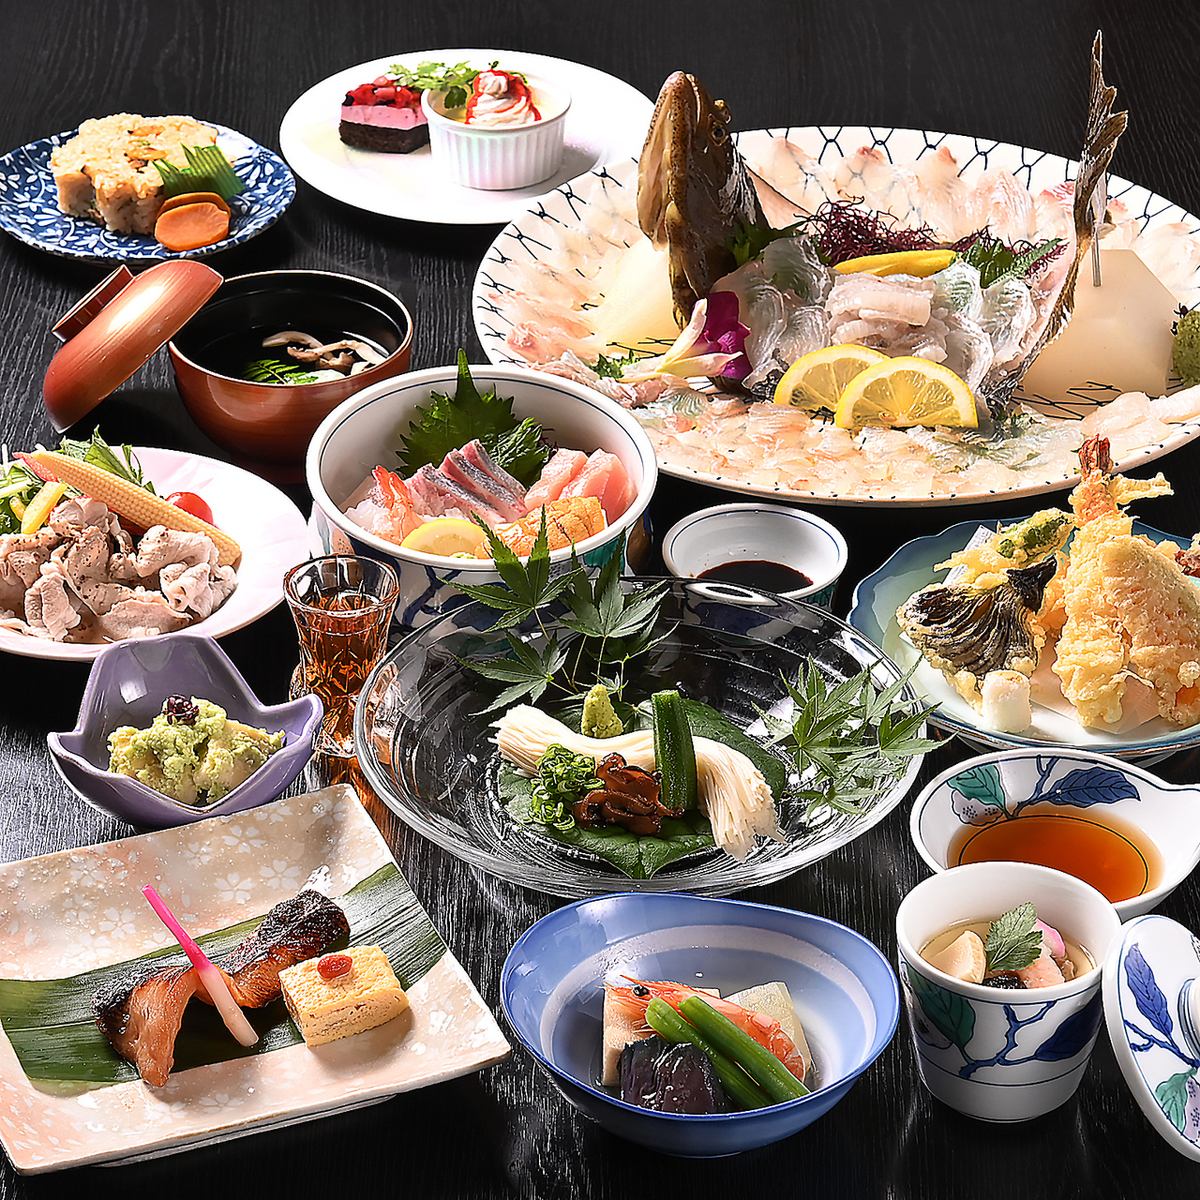 Live fish with outstanding freshness! Served by handling the fish in the cage.We also offer seasonal kaiseki cuisine.